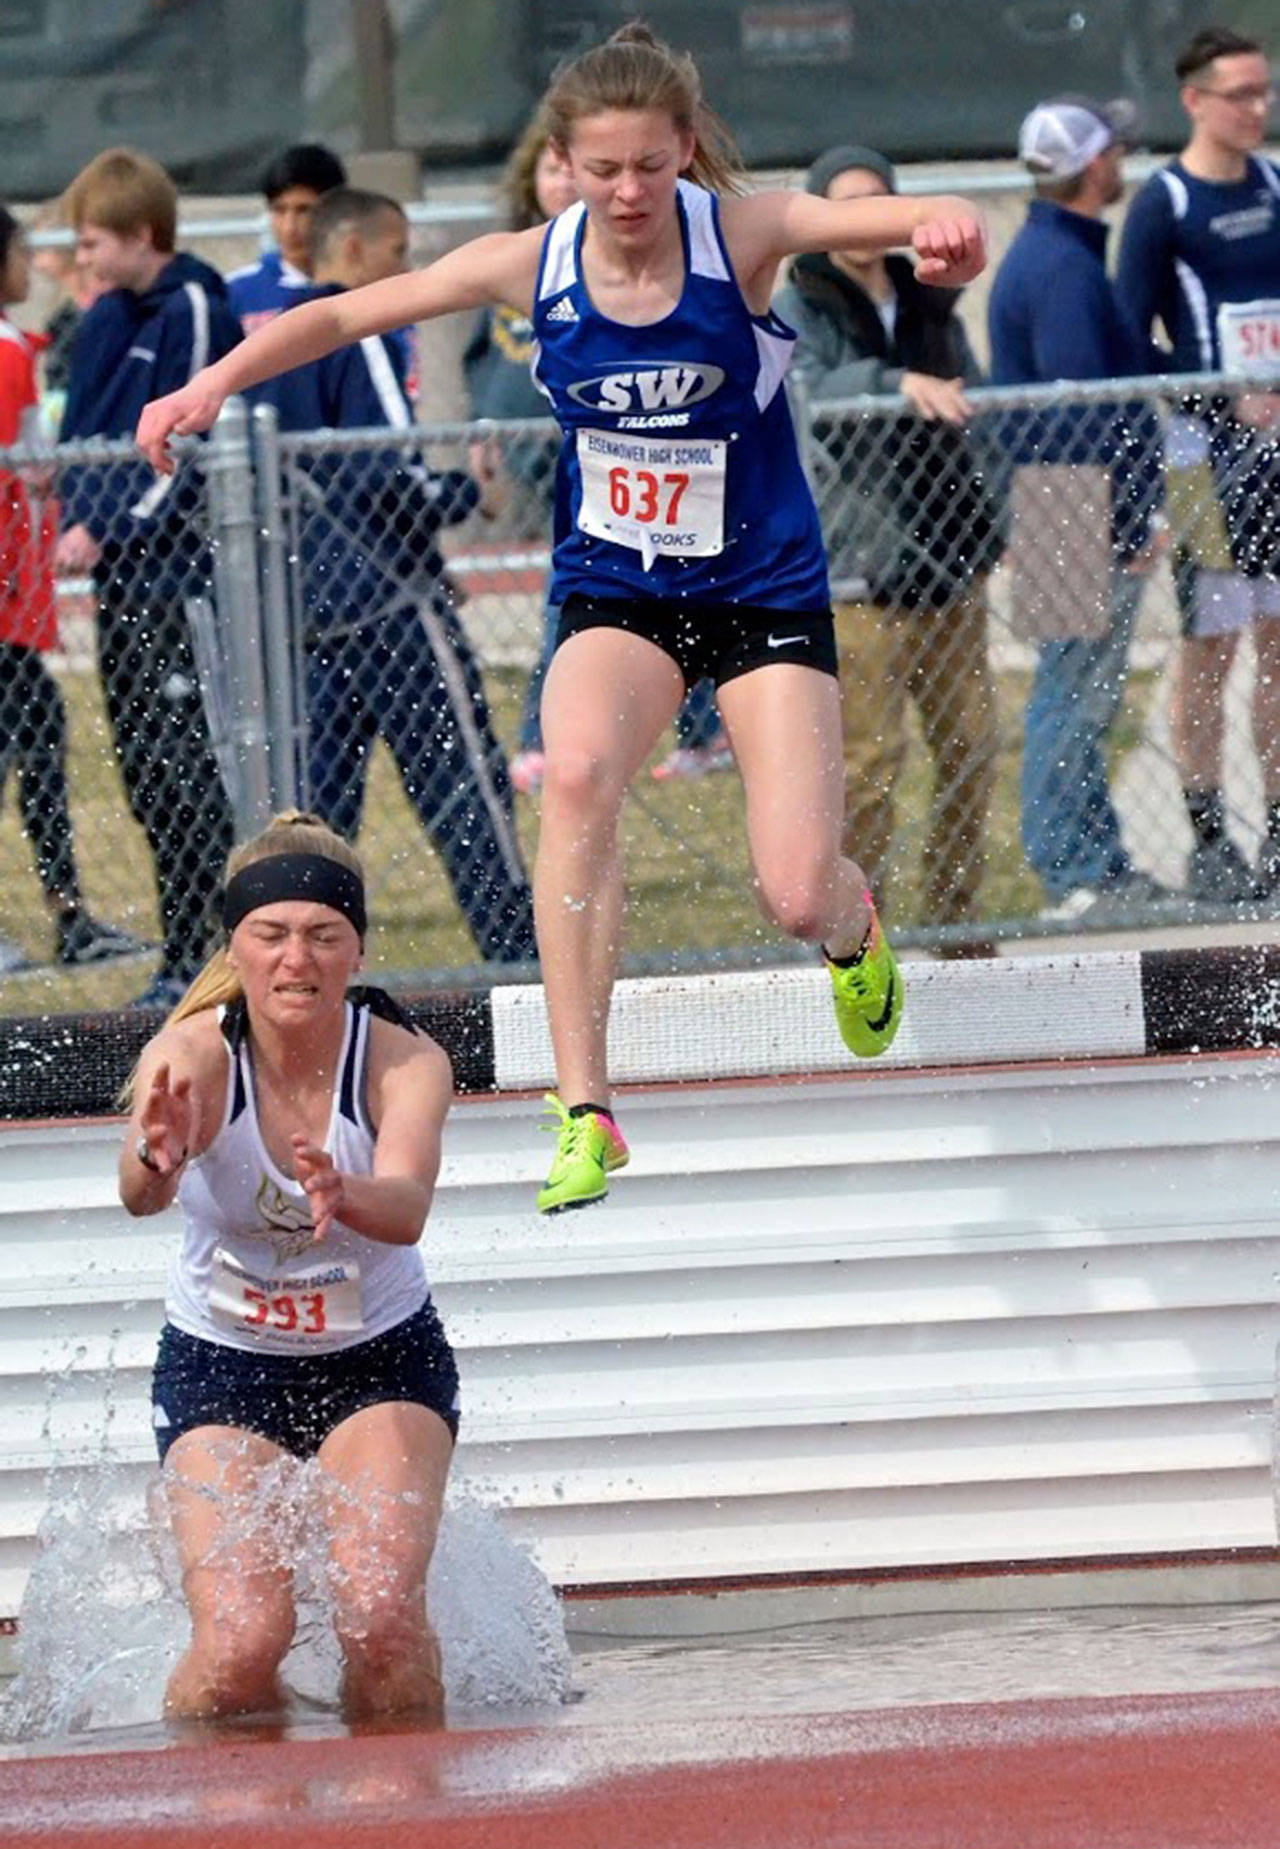 South Whidbey freshman Kaia Swegler Richmond (637) set a school record in the 2K steeplechase at the Holder Relays in Yakima March 31. (Submitted photo)